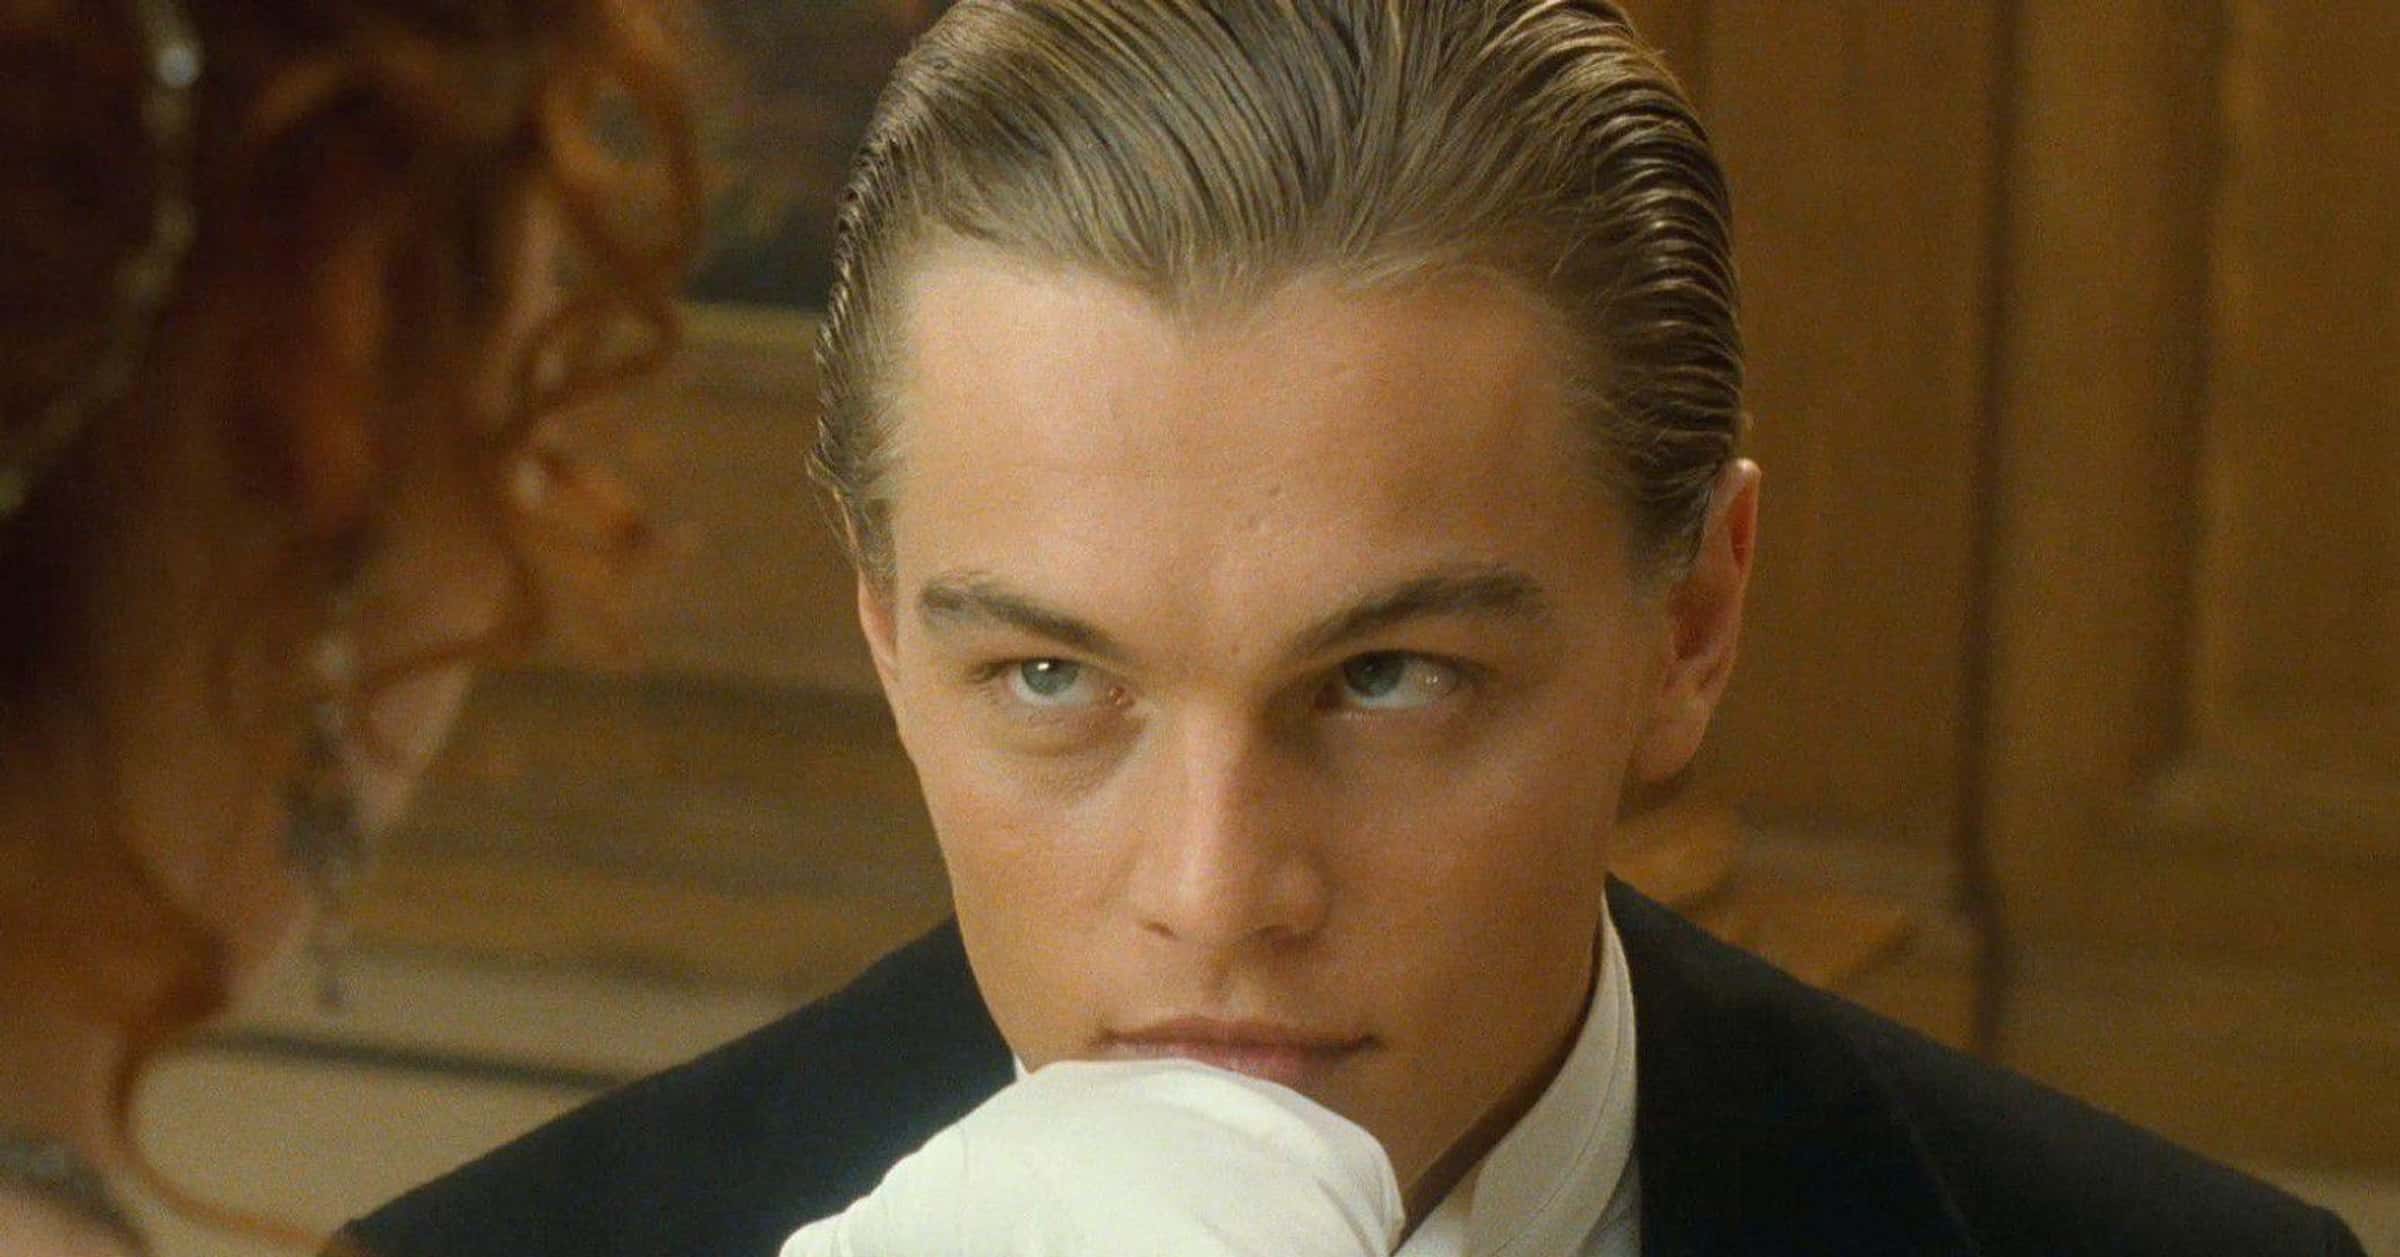 Titanic': Jack Is A Time Traveler From The Future, According To This Theory